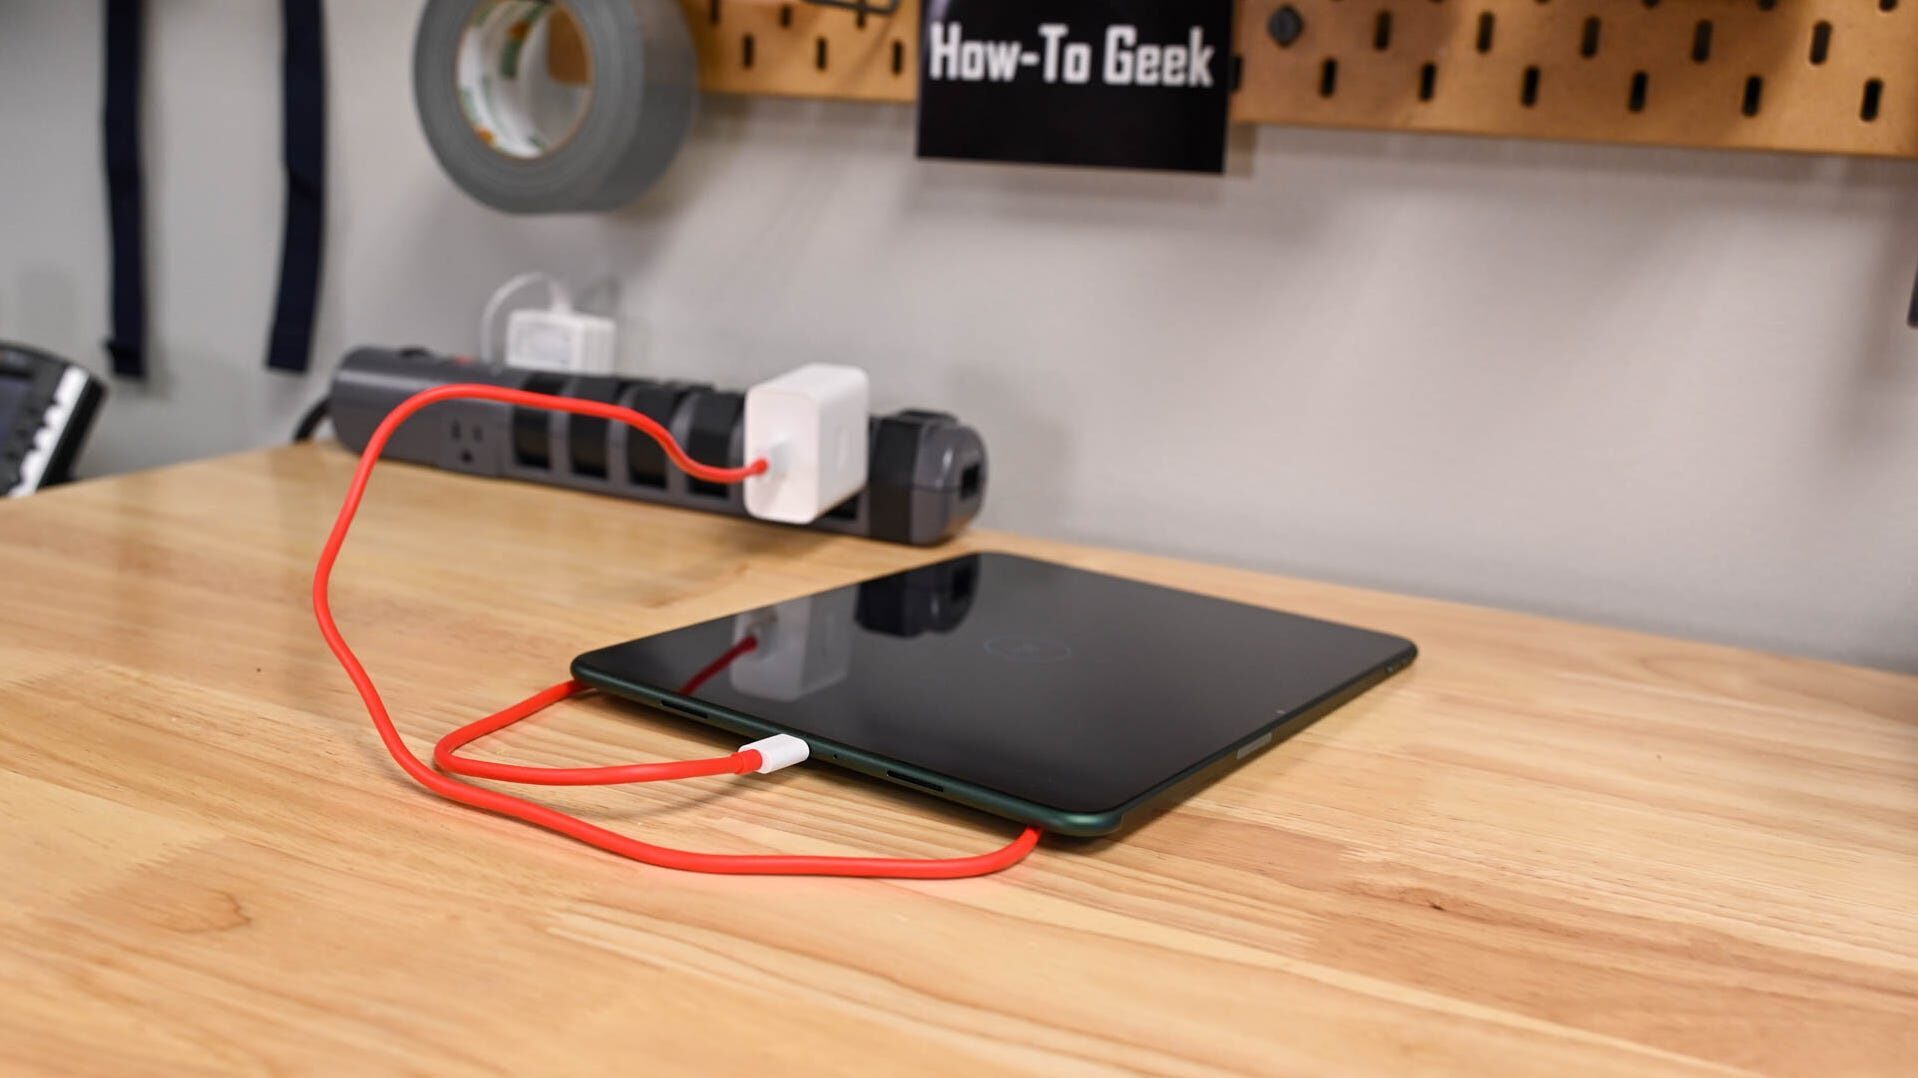 oneplus-pad-charging-on-a-workbenchjpg_52793550651_o-7837620-1286125